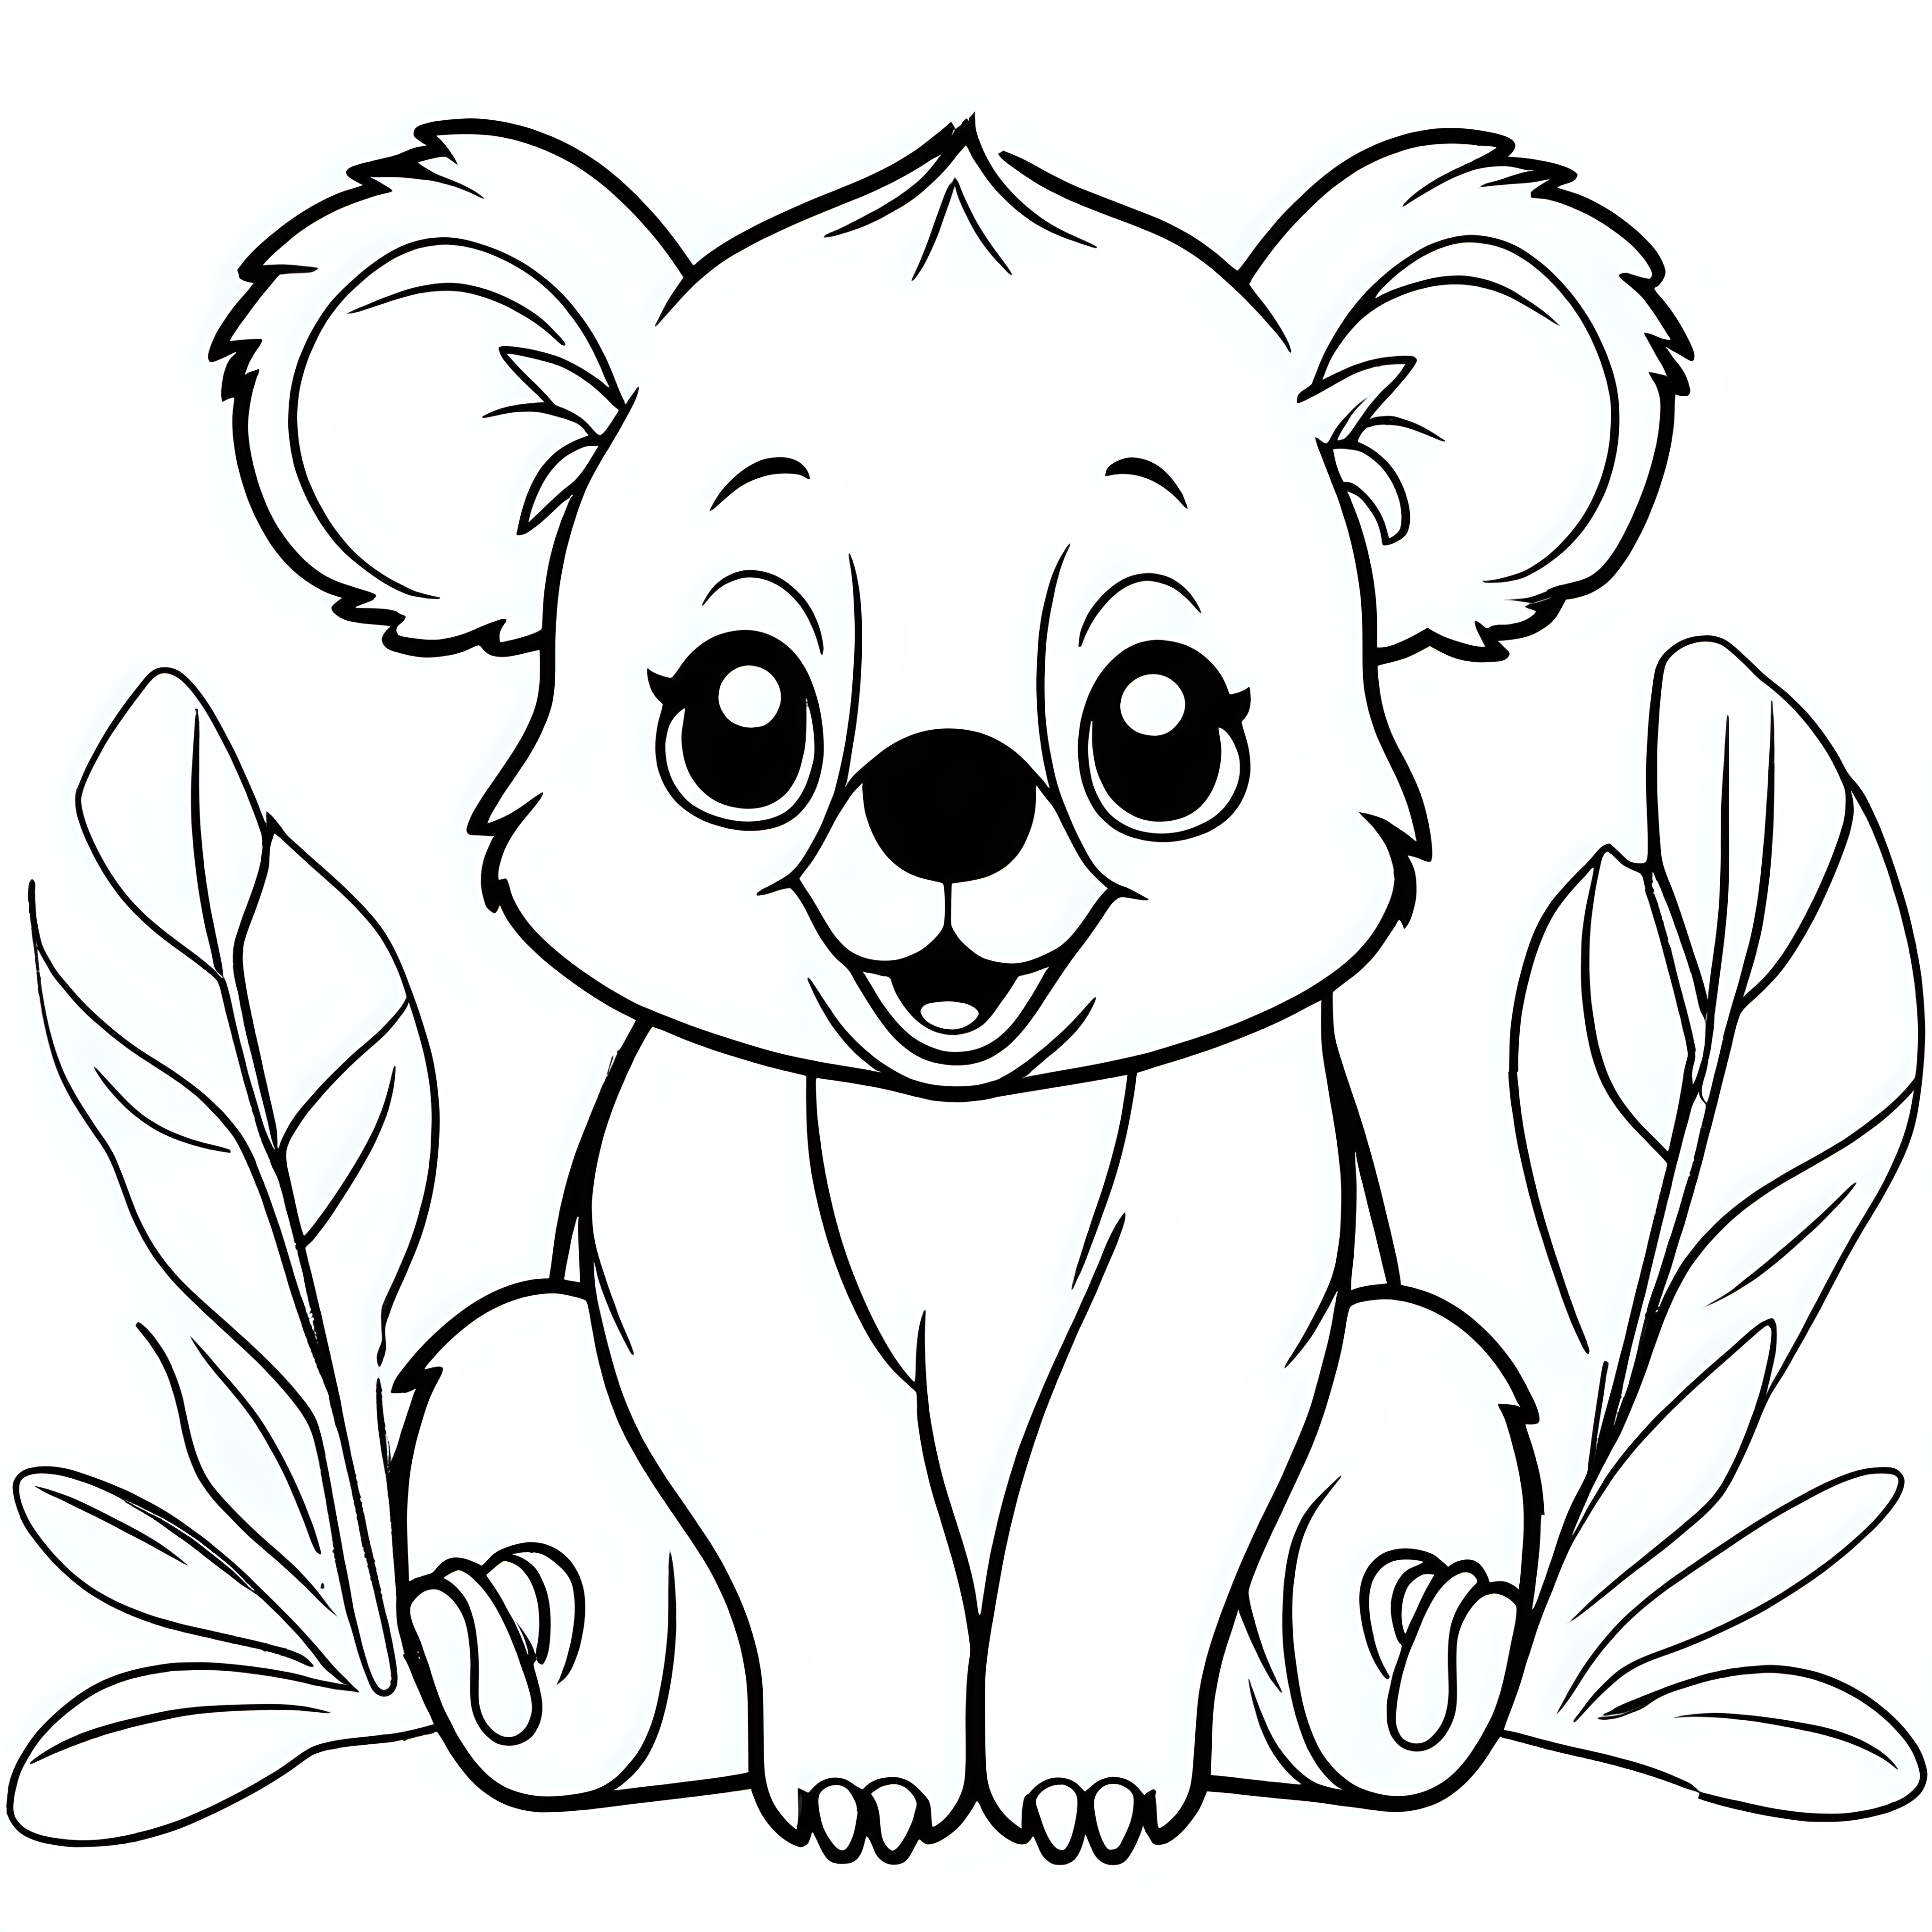 draw a cute coala with only the outline  for a coloring book